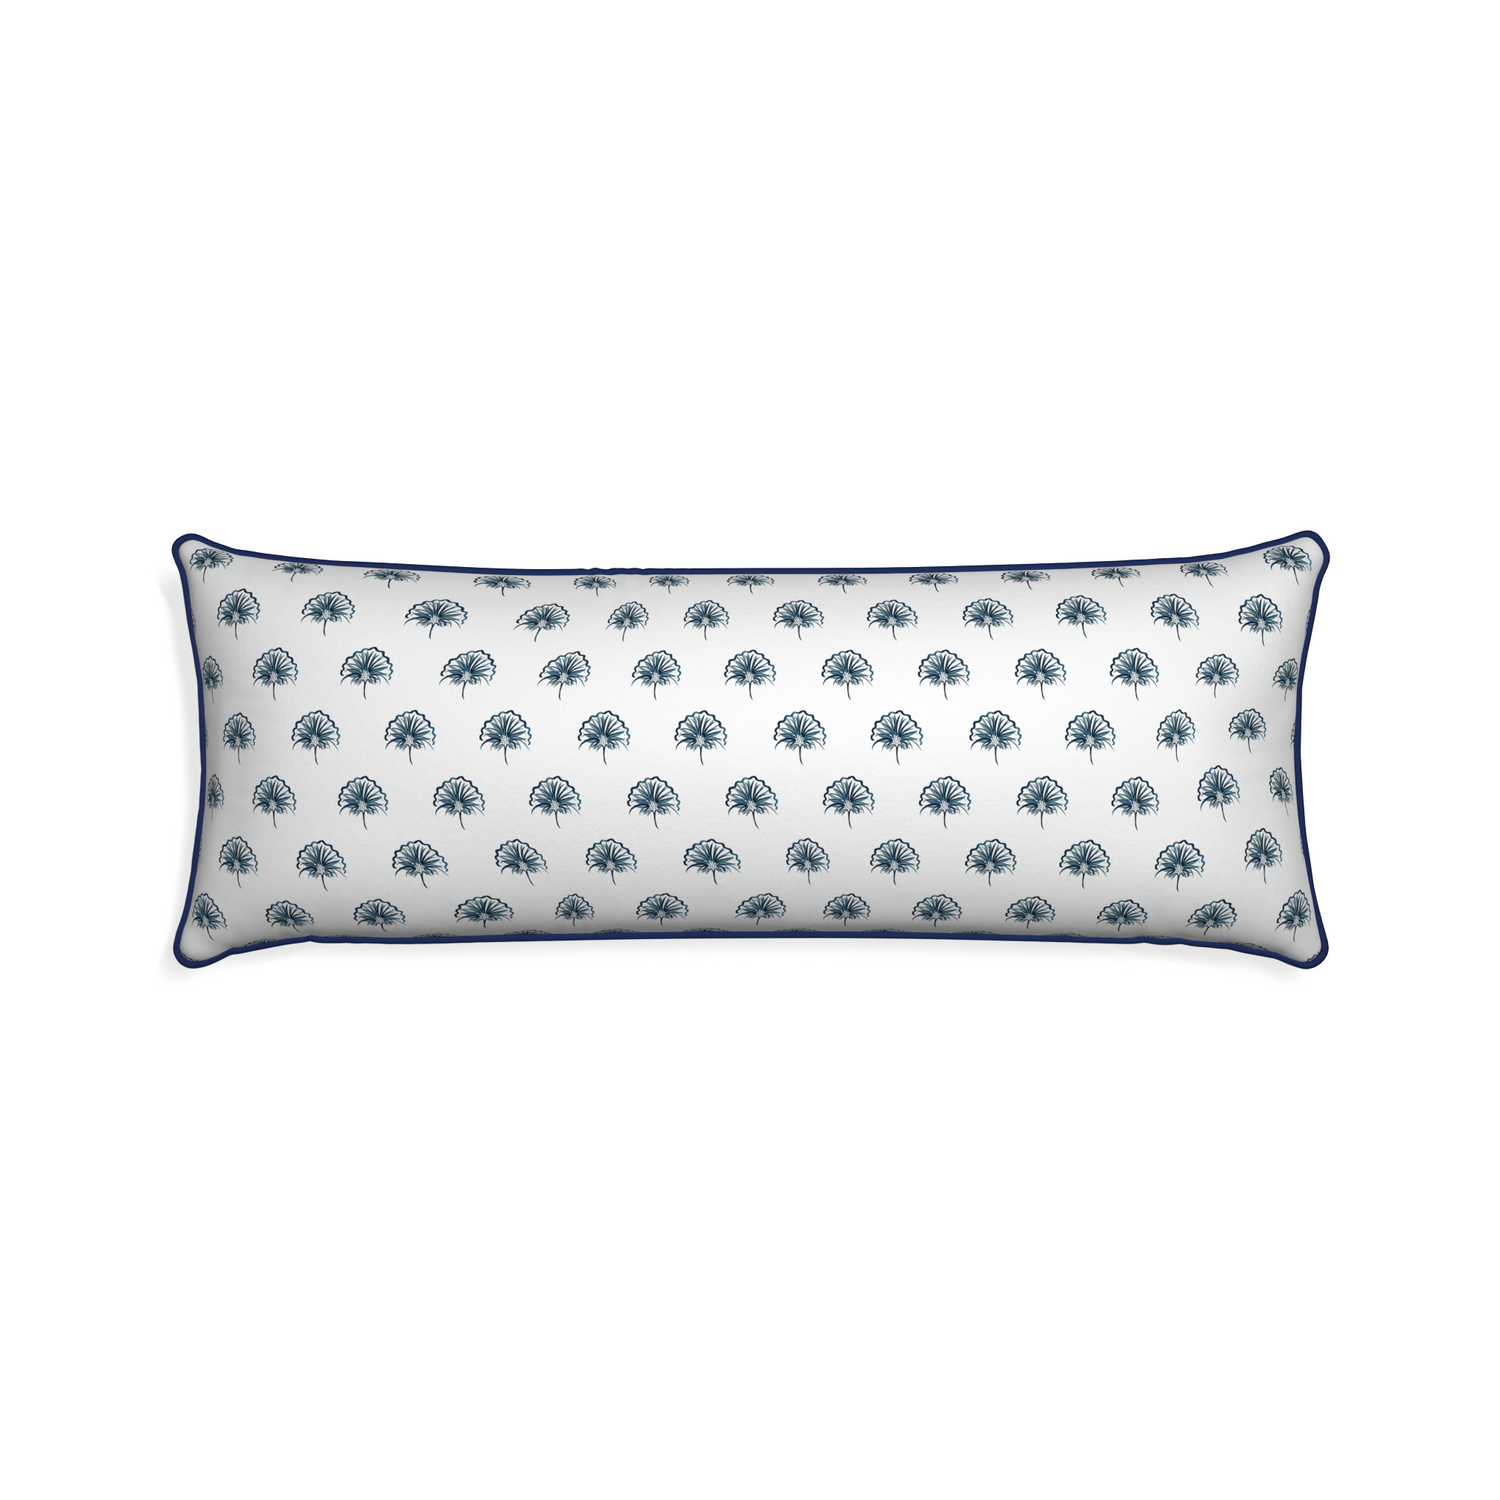 Xl-lumbar penelope midnight custom pillow with midnight piping on white background